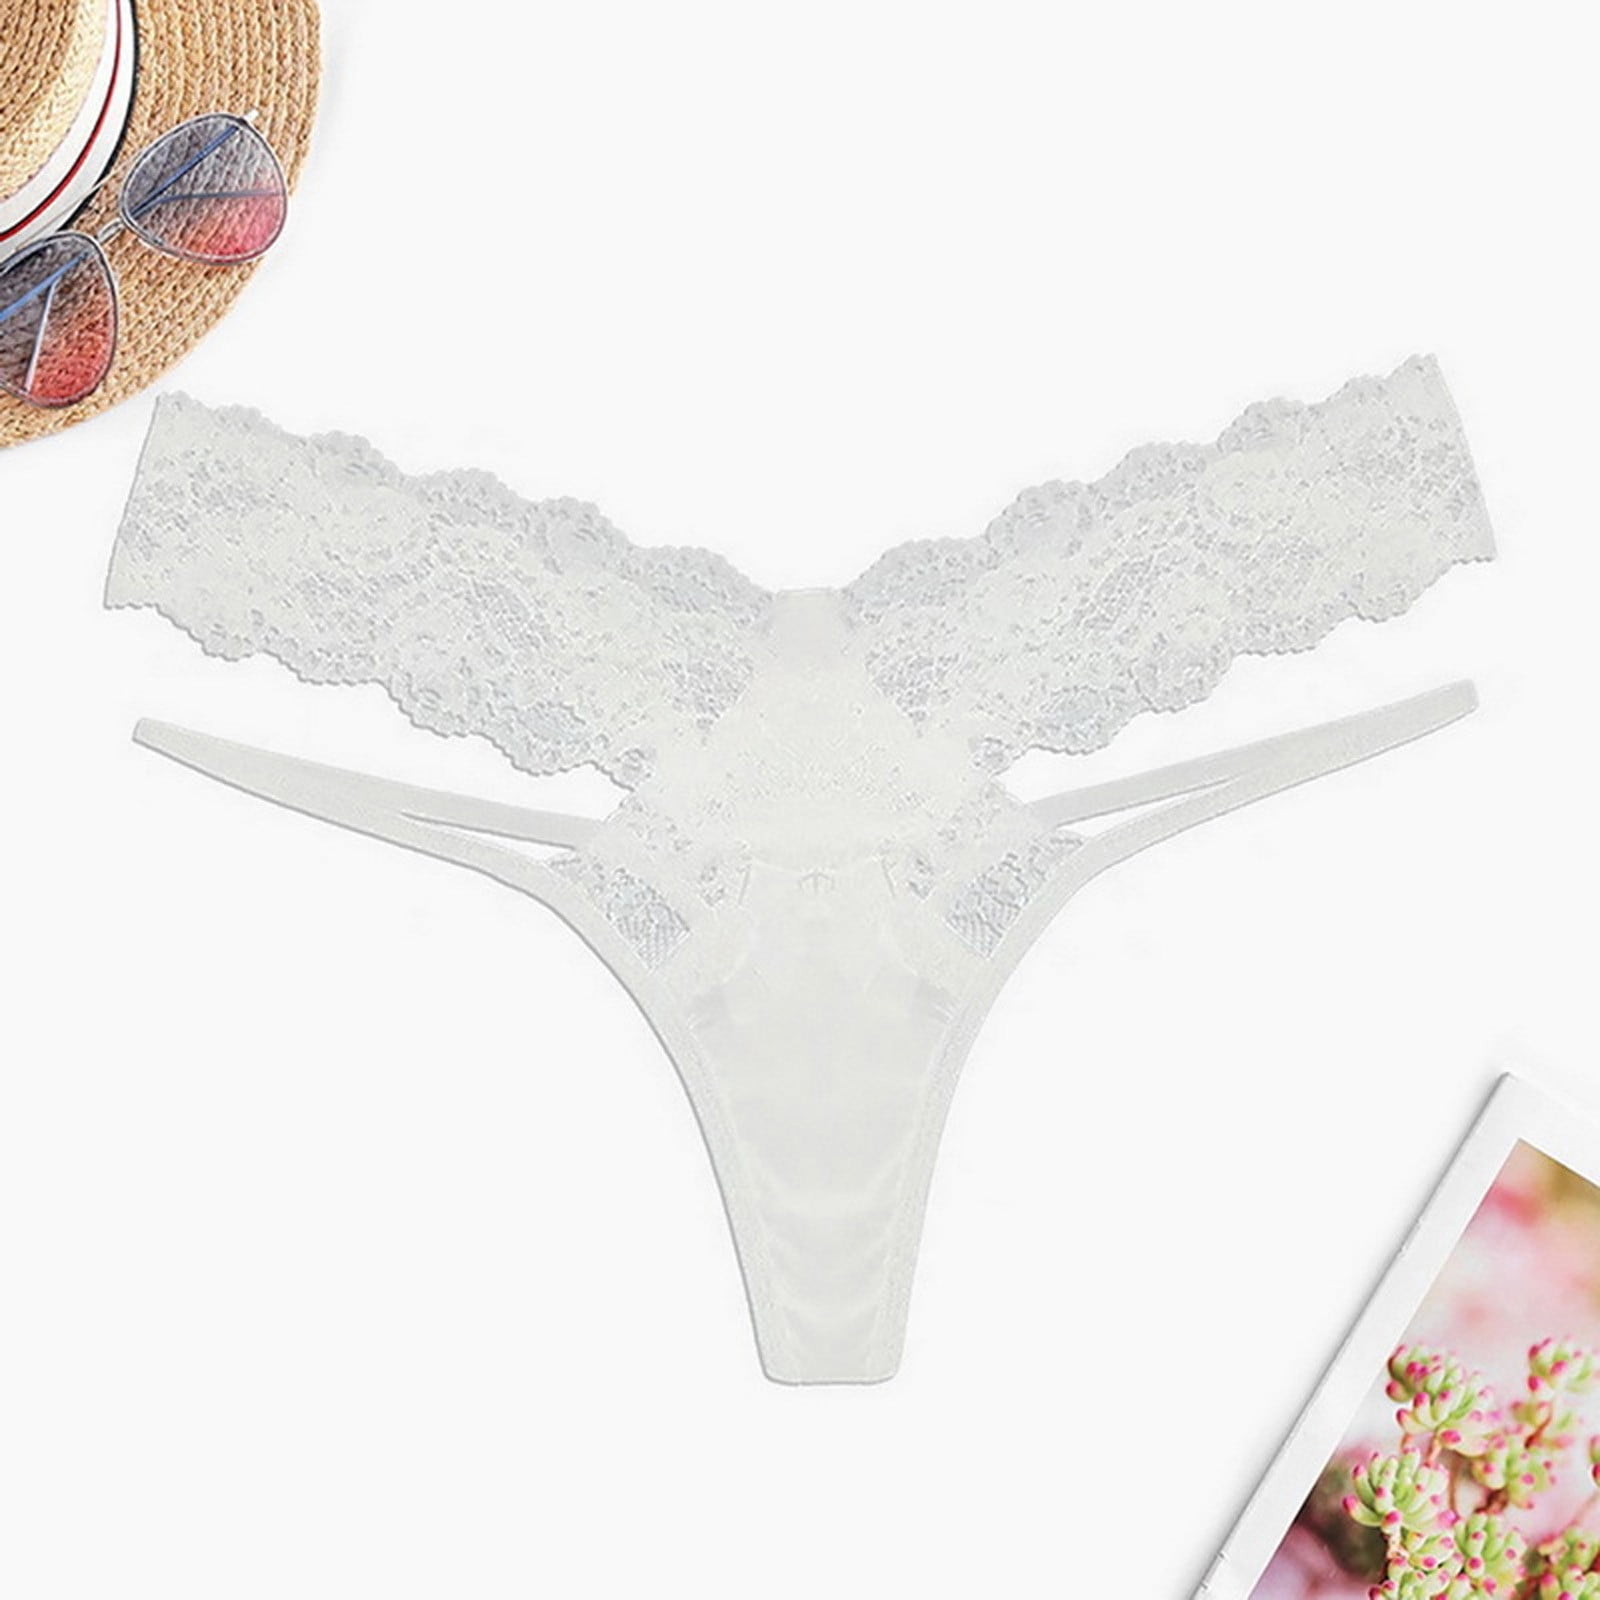 Guzom Underwear for Women Lace G-String Thongs Lace High Cut Tanga Cheeky  Low Rise Hipster Briefs- White Size M 